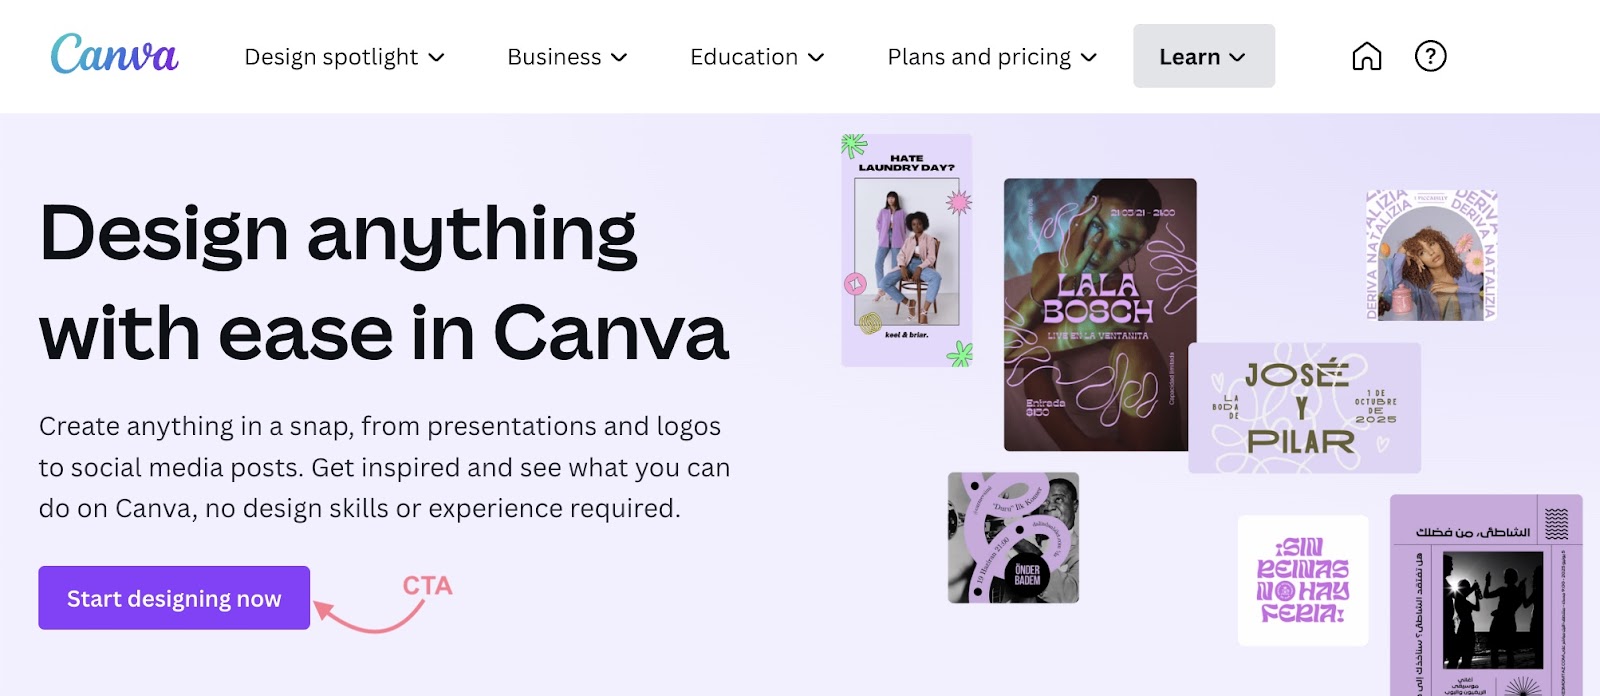 "Start designing now" CTA connected  Canva's website